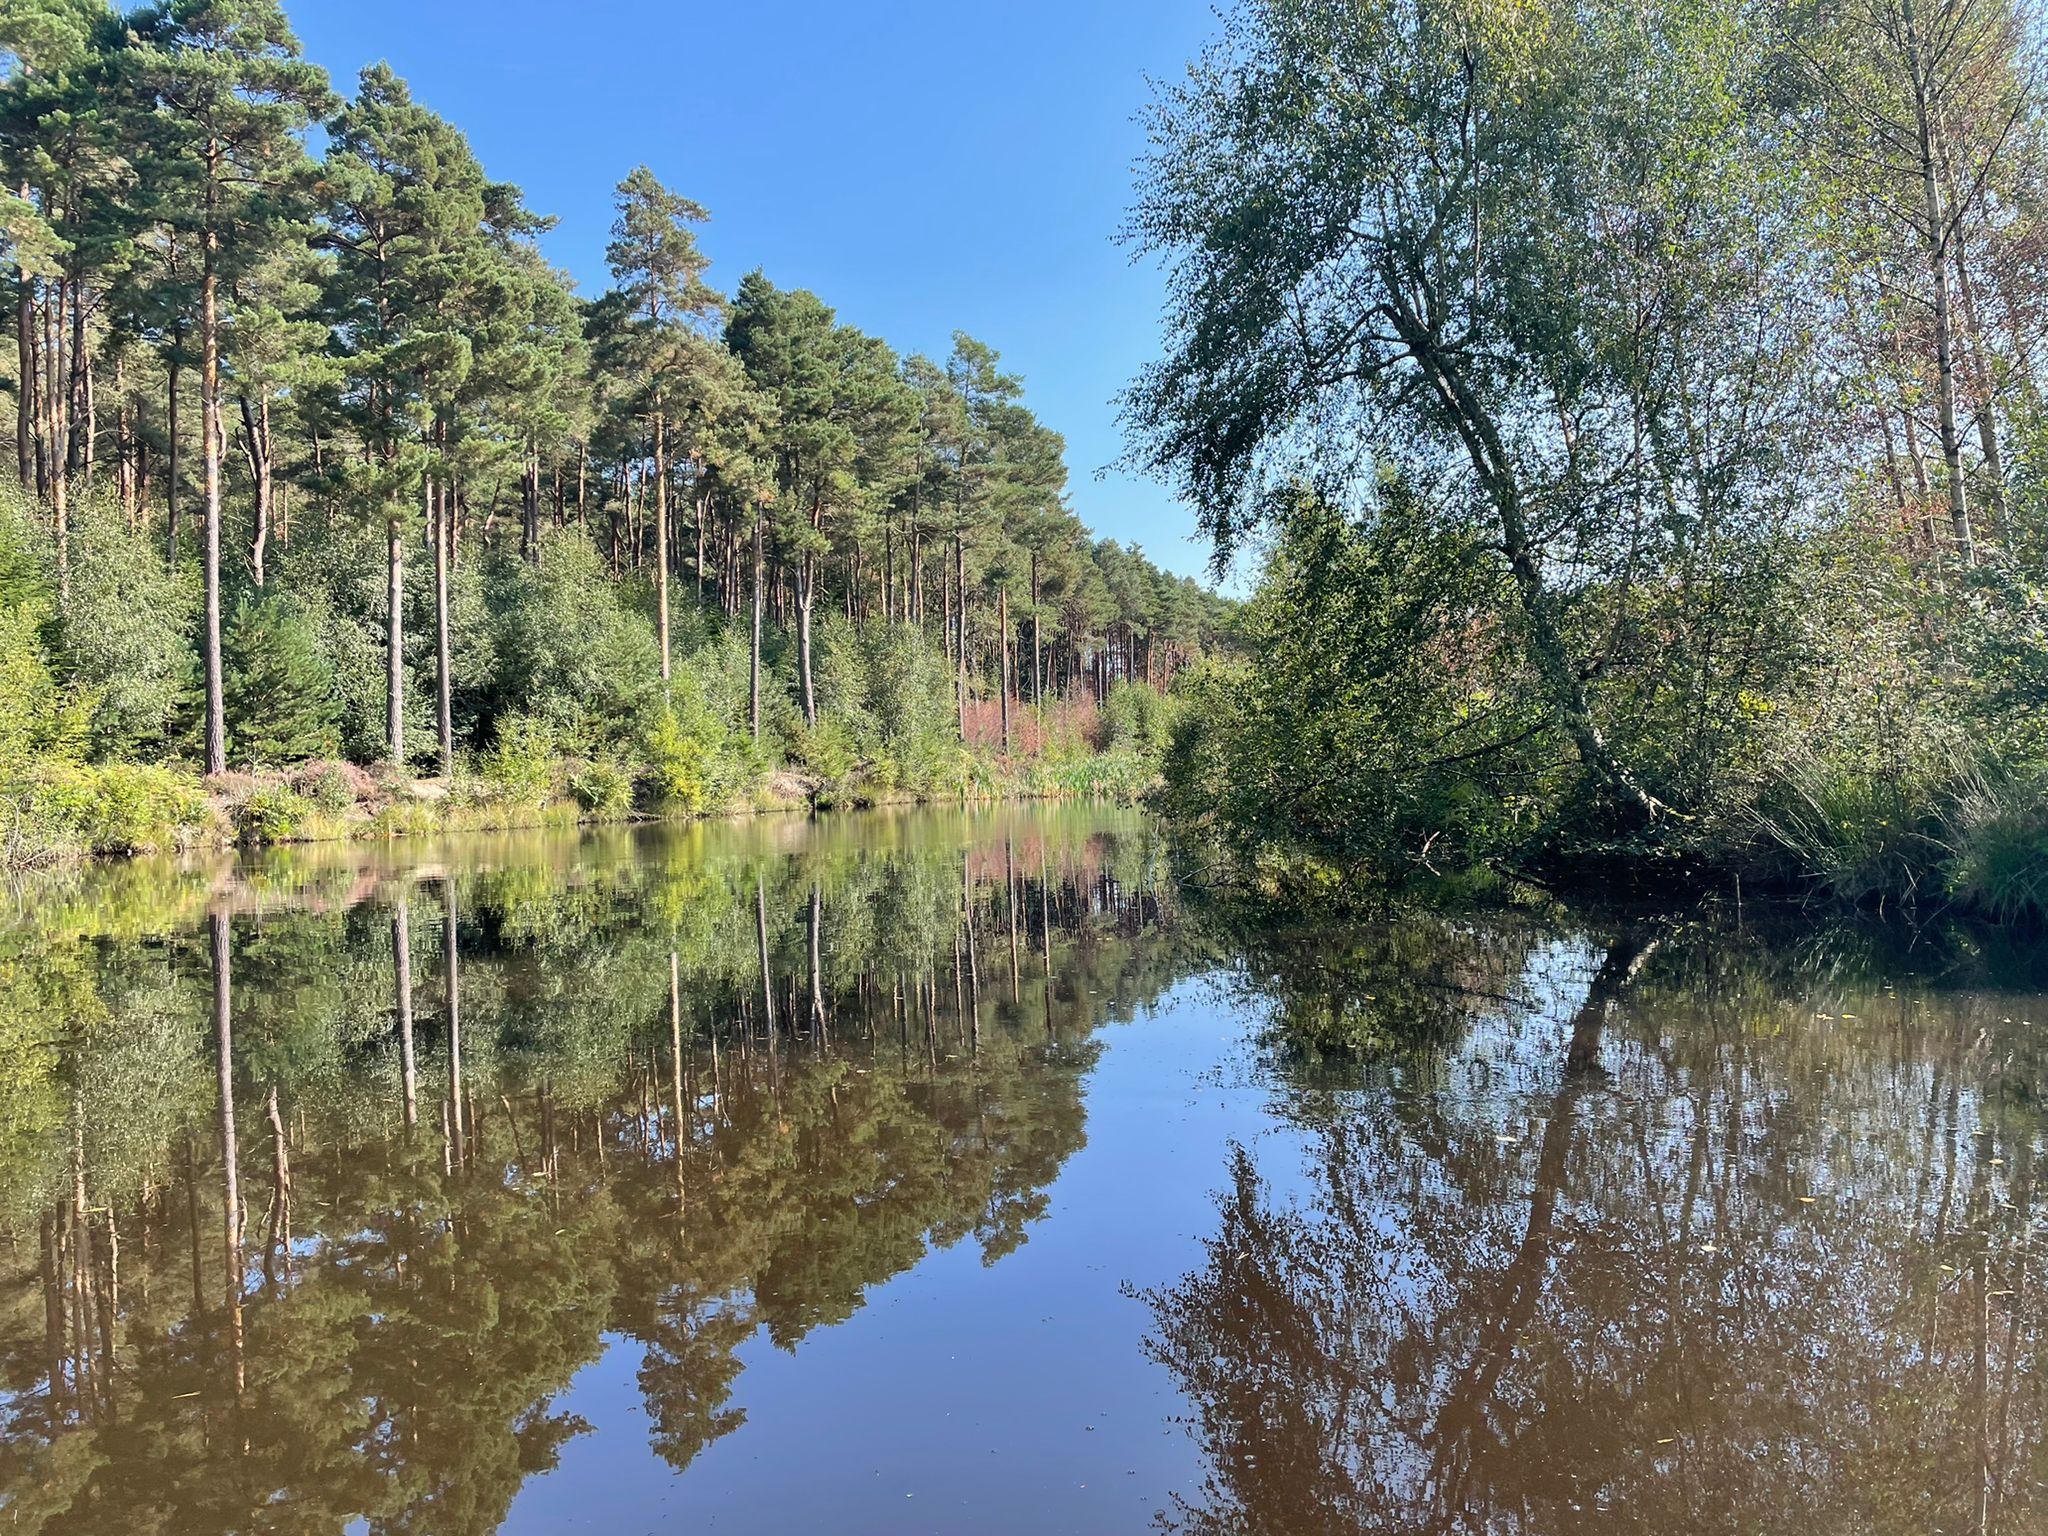 View across a large pond with mature trees either side, reflected in the clear water